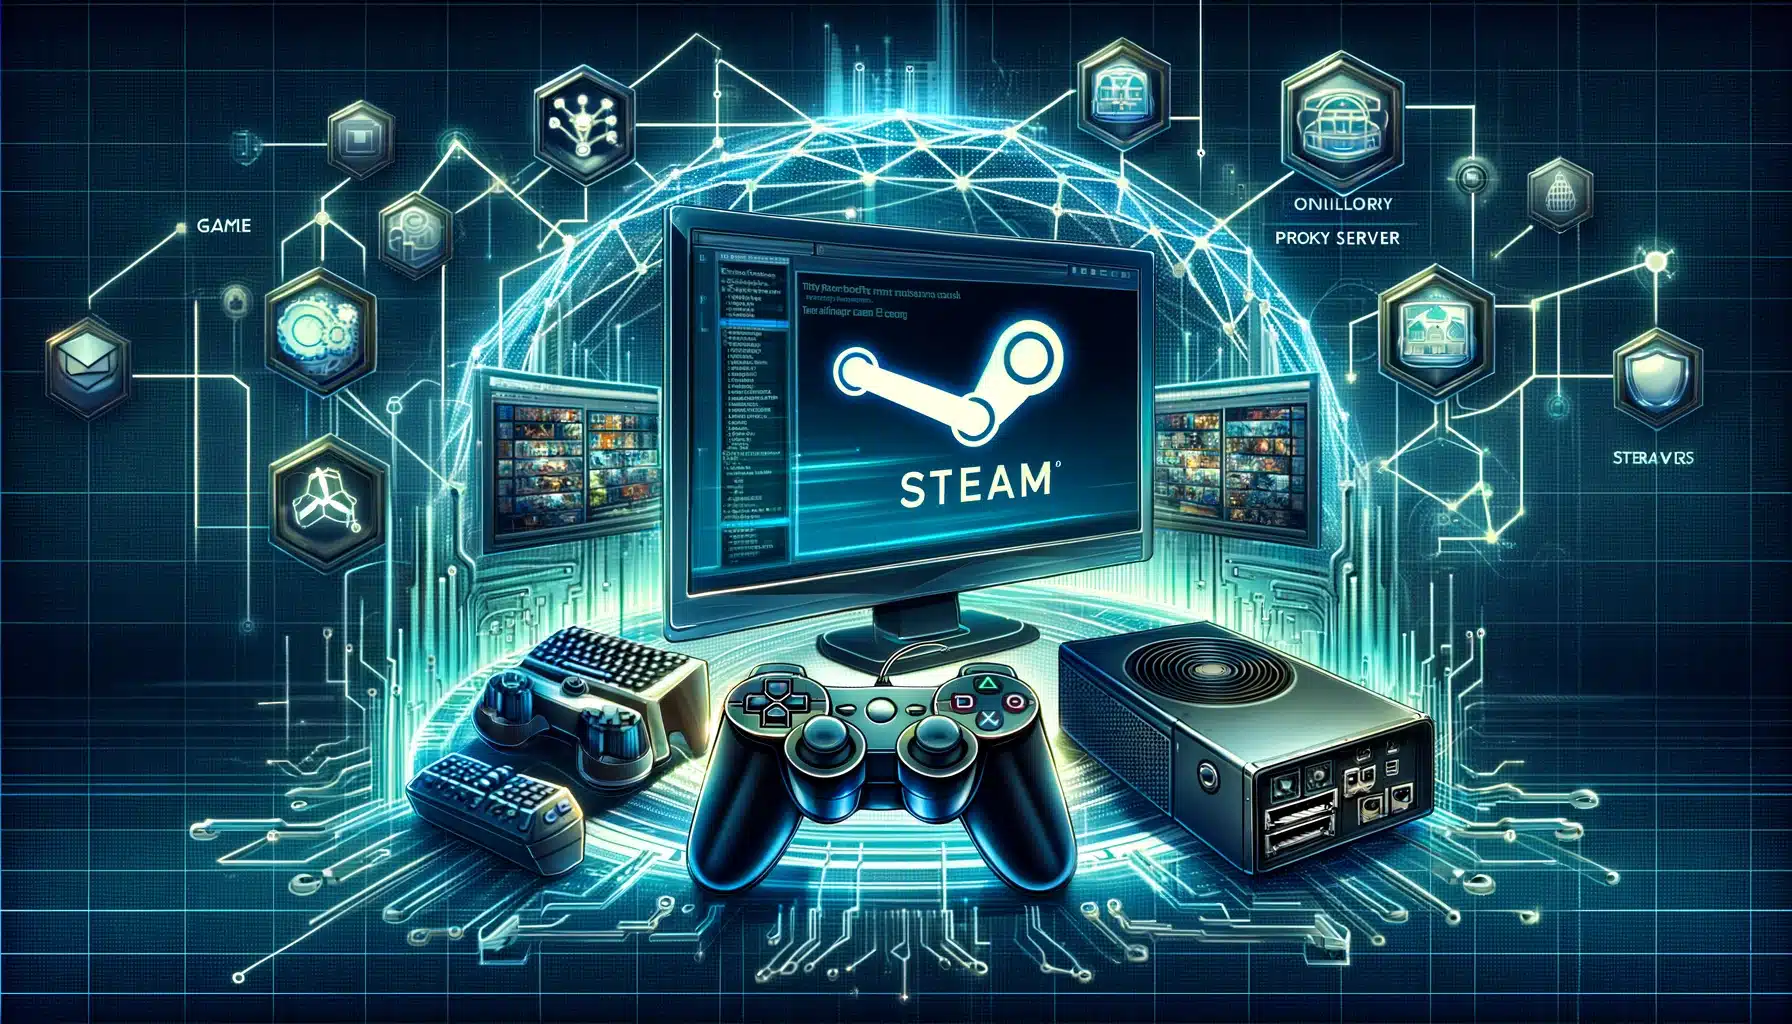 Proxy for Steam